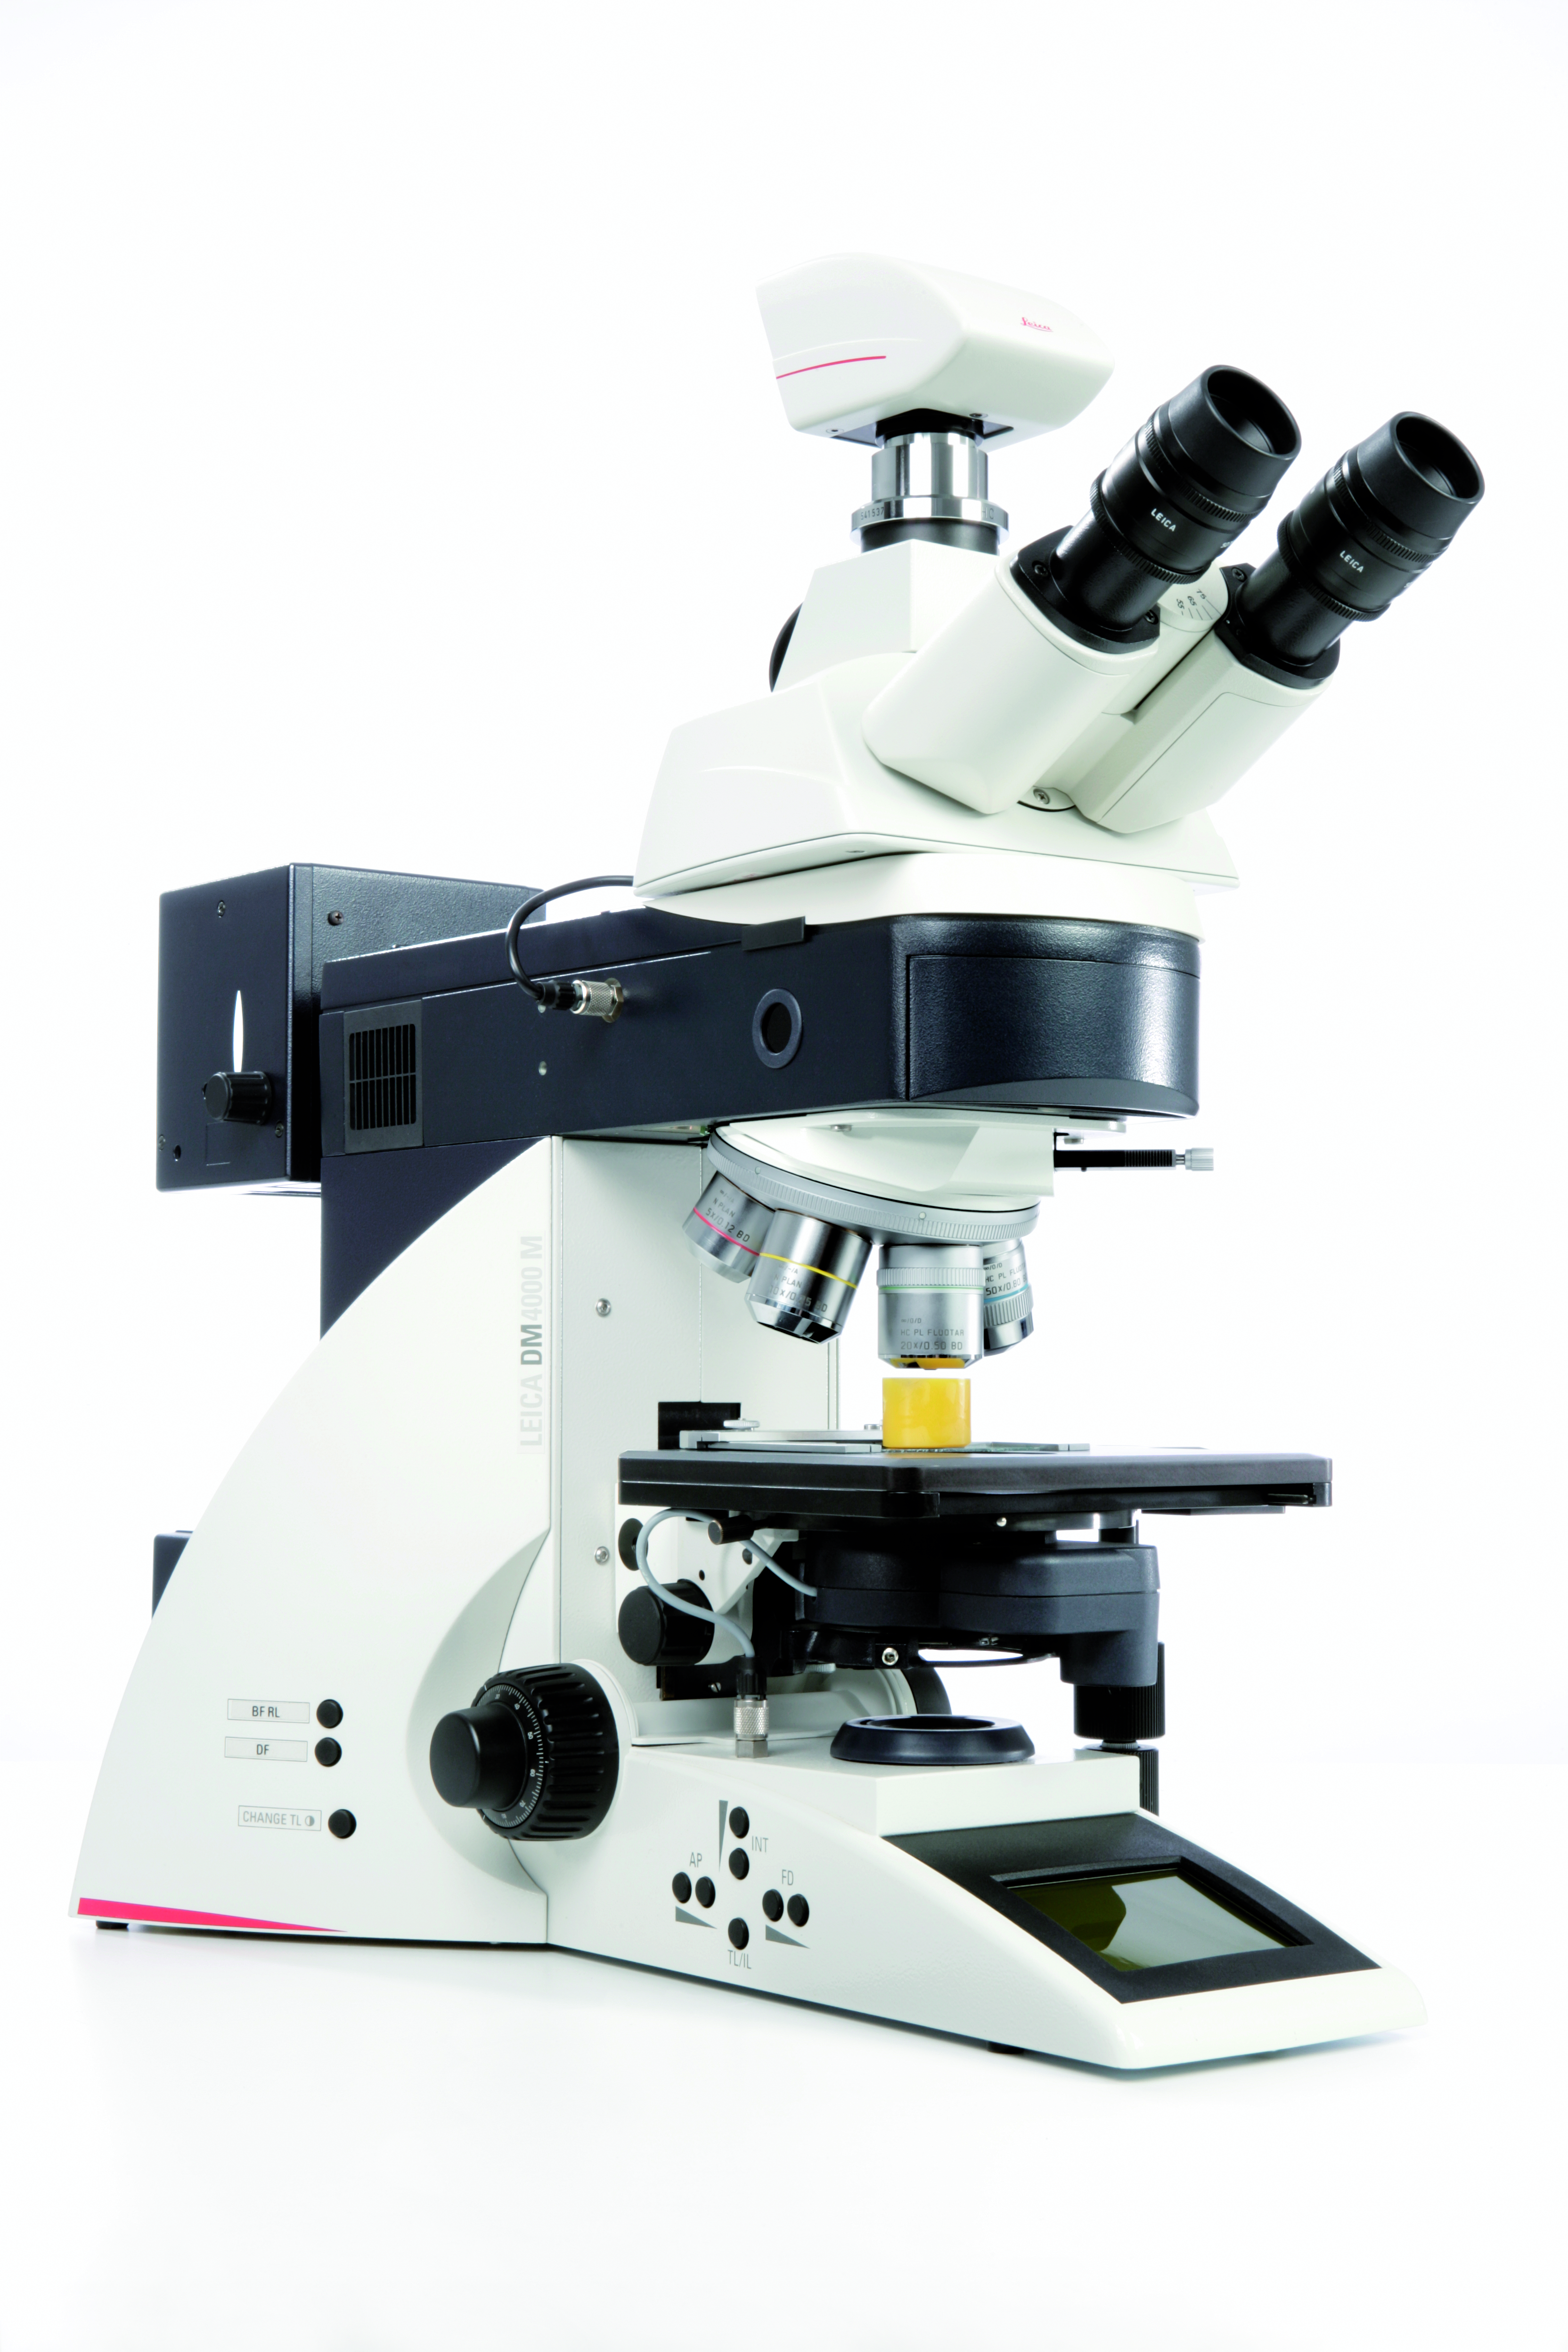 The Leica DM4000 M saves time and provides reproducible results.